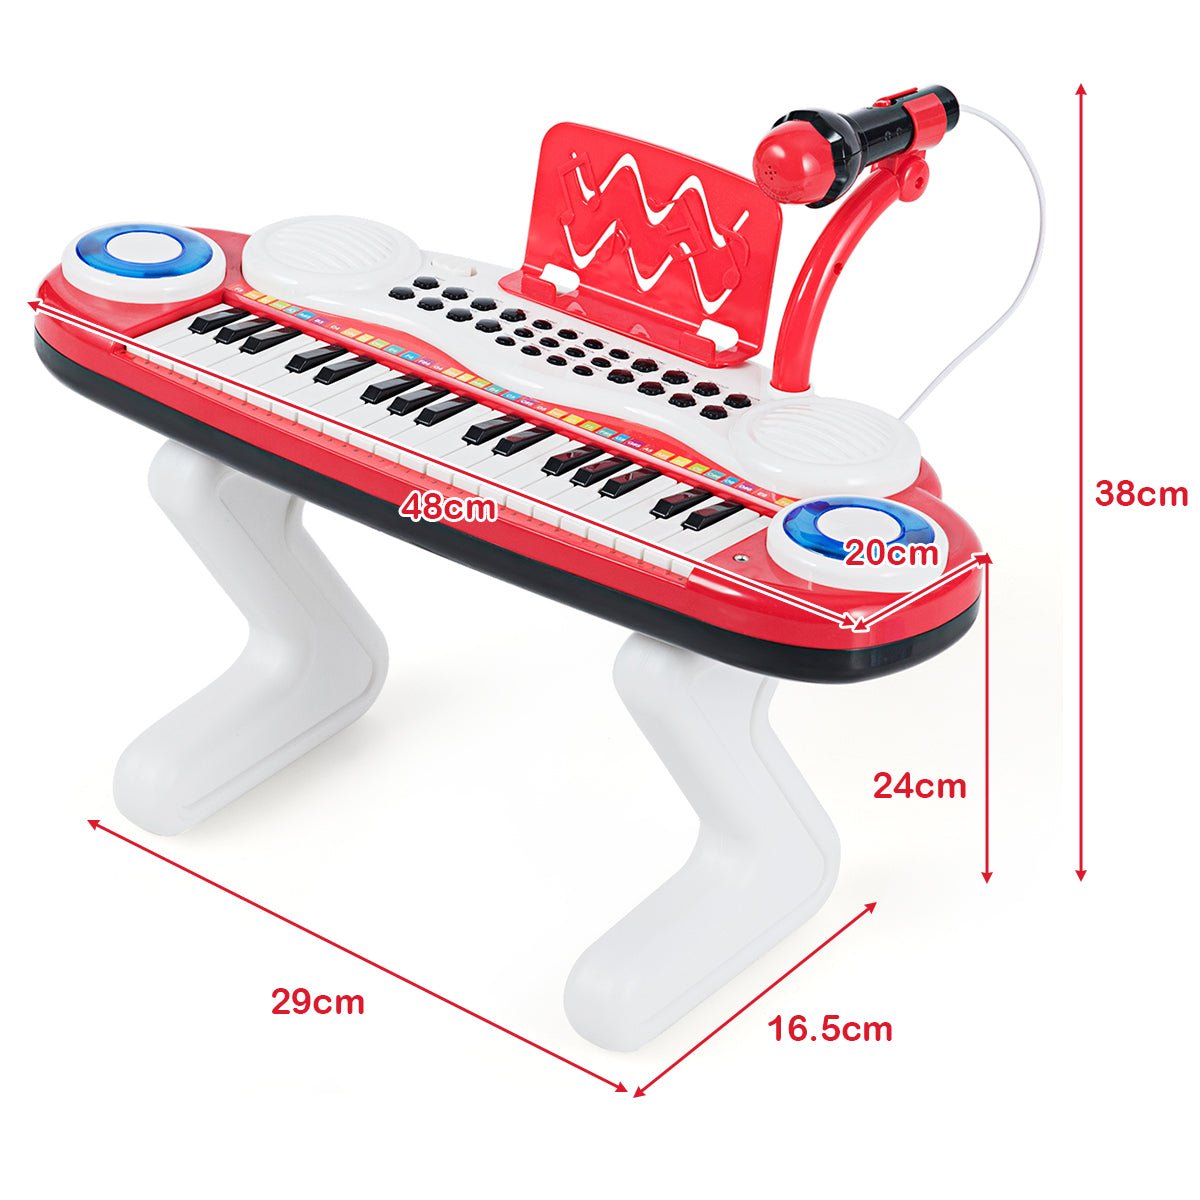 1Play Like a Pro with the Red Kids Keyboard Piano